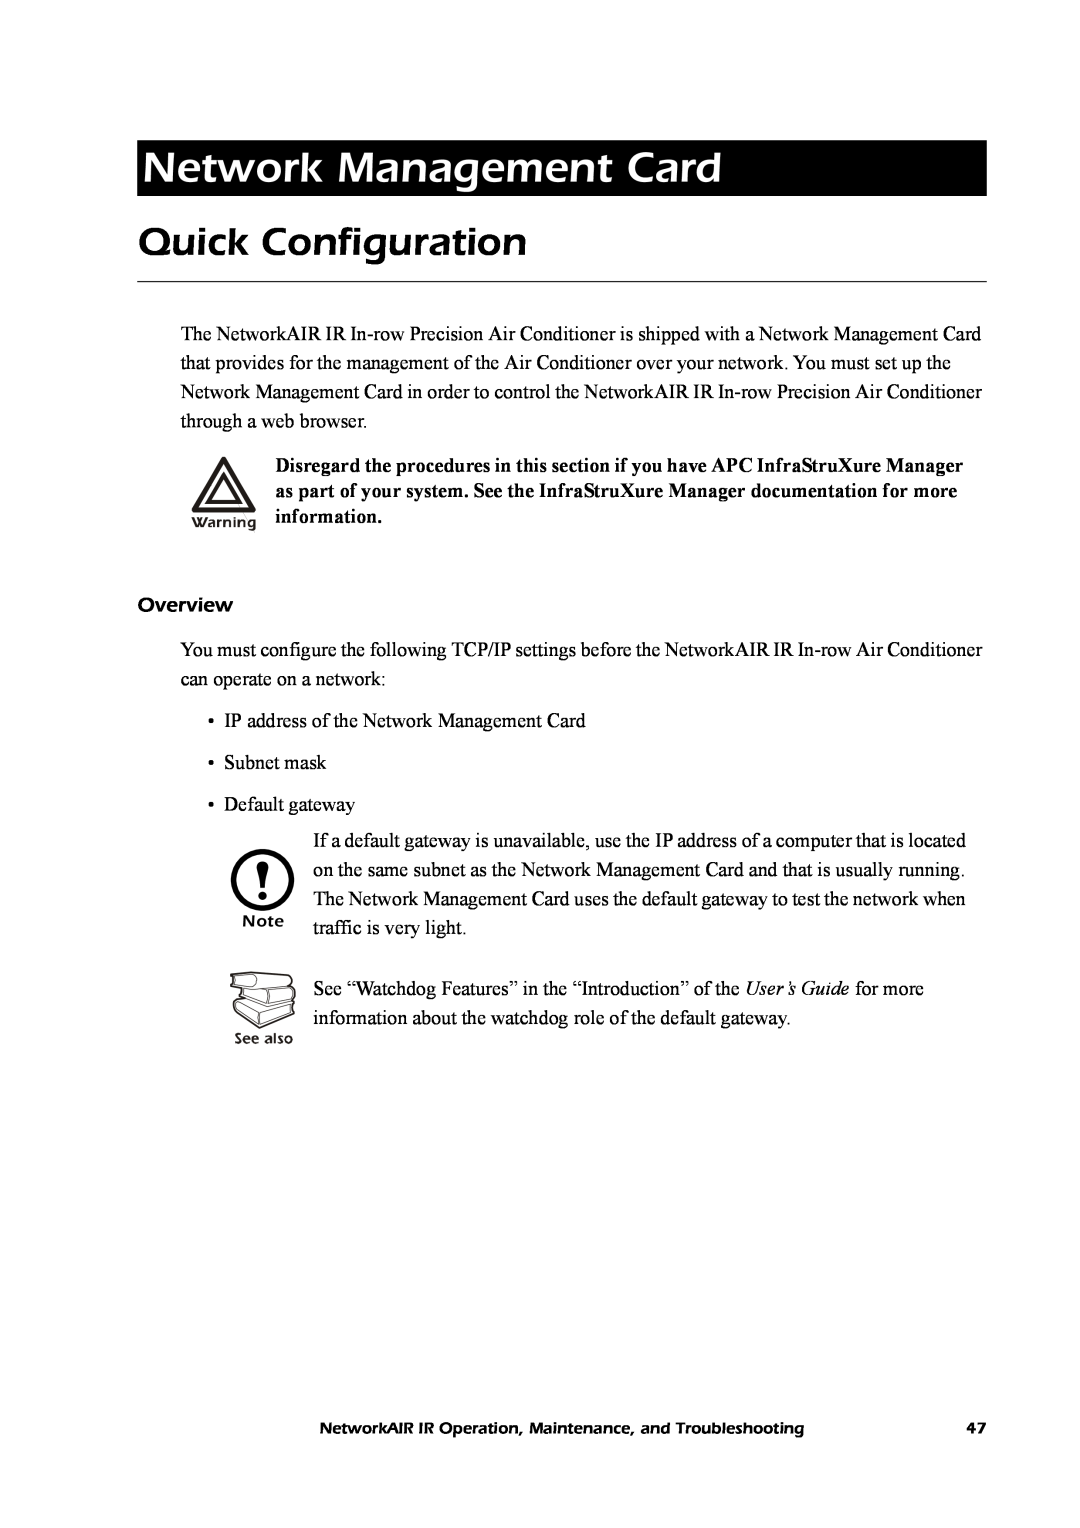 American Power Conversion Central Air Conditioning System manual Network Management Card, Quick Configuration 